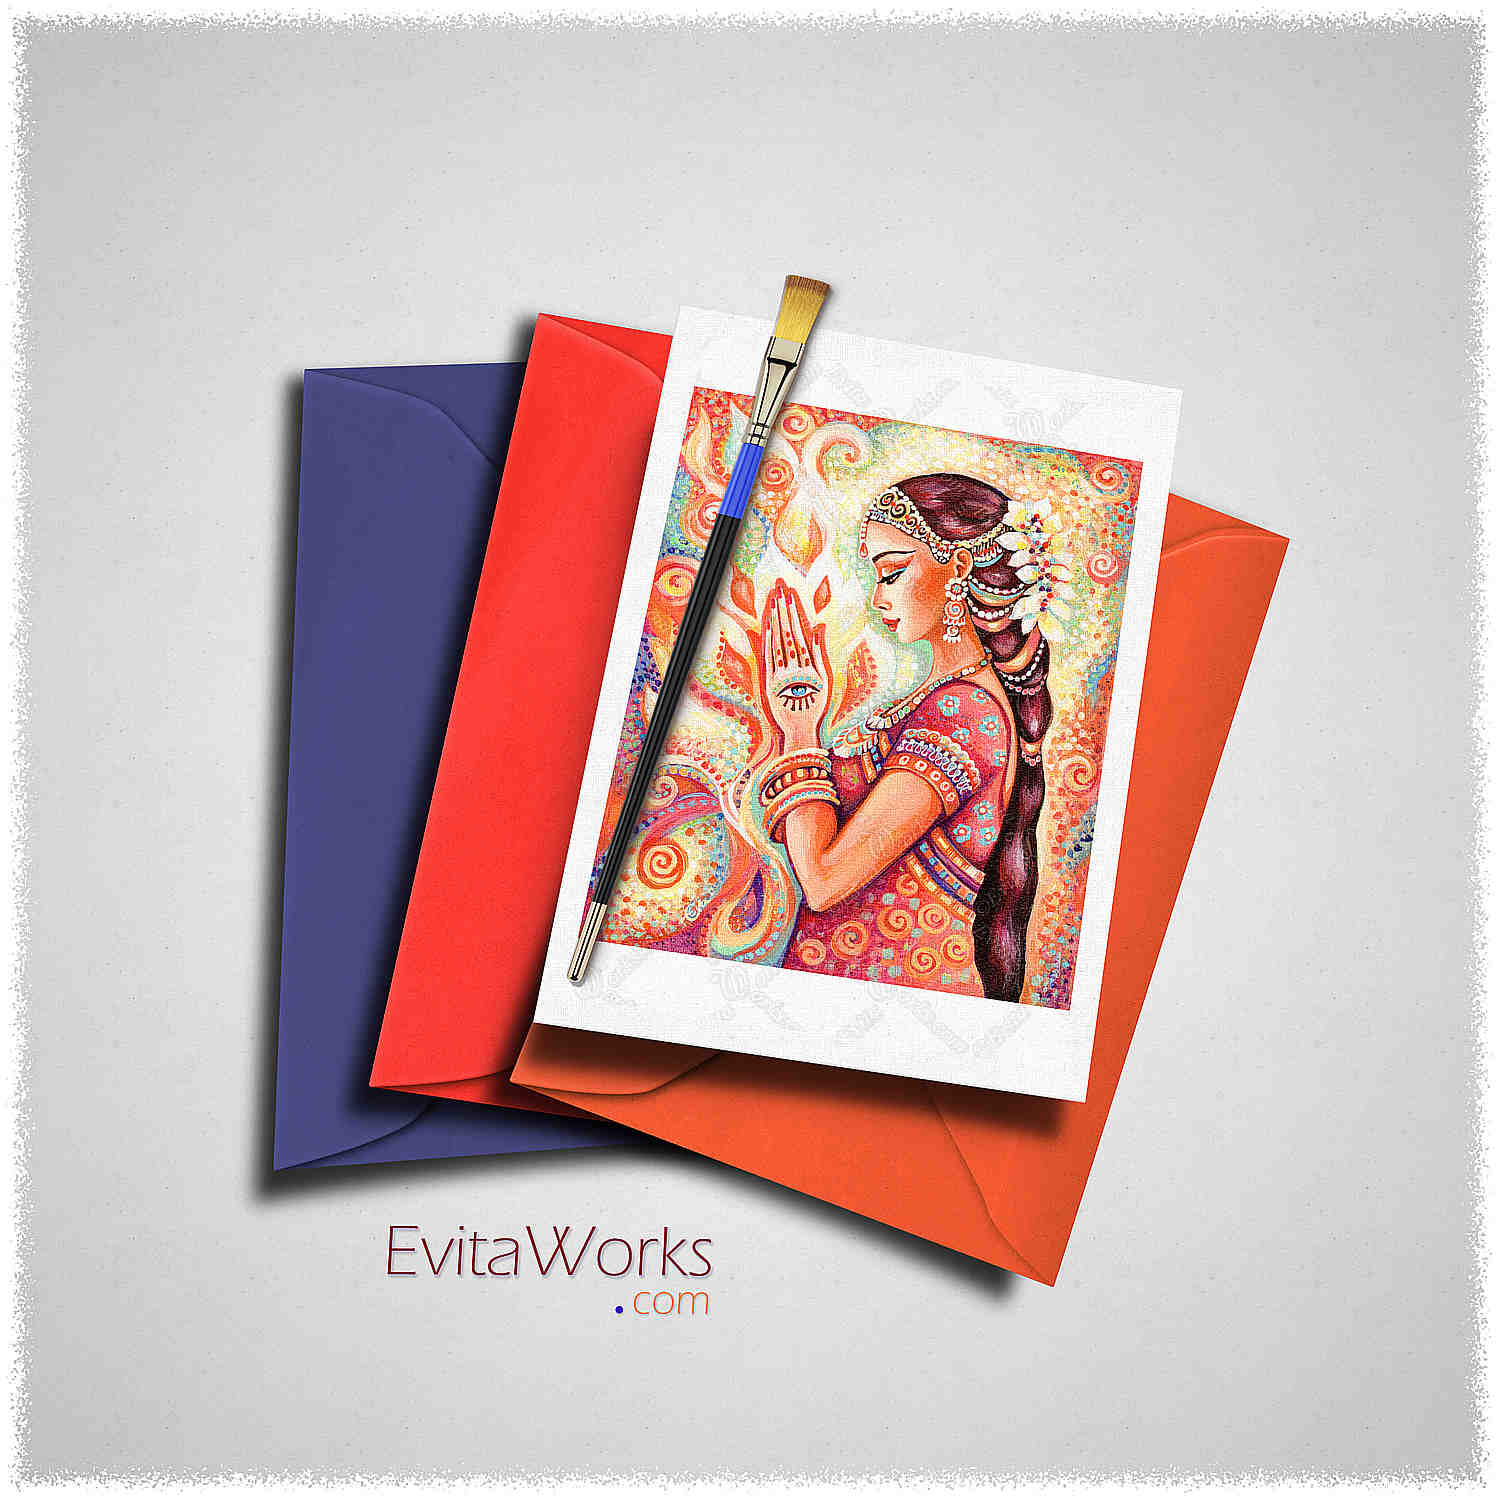 Hit to learn about "Sacred Pray, Indian woman" on cards